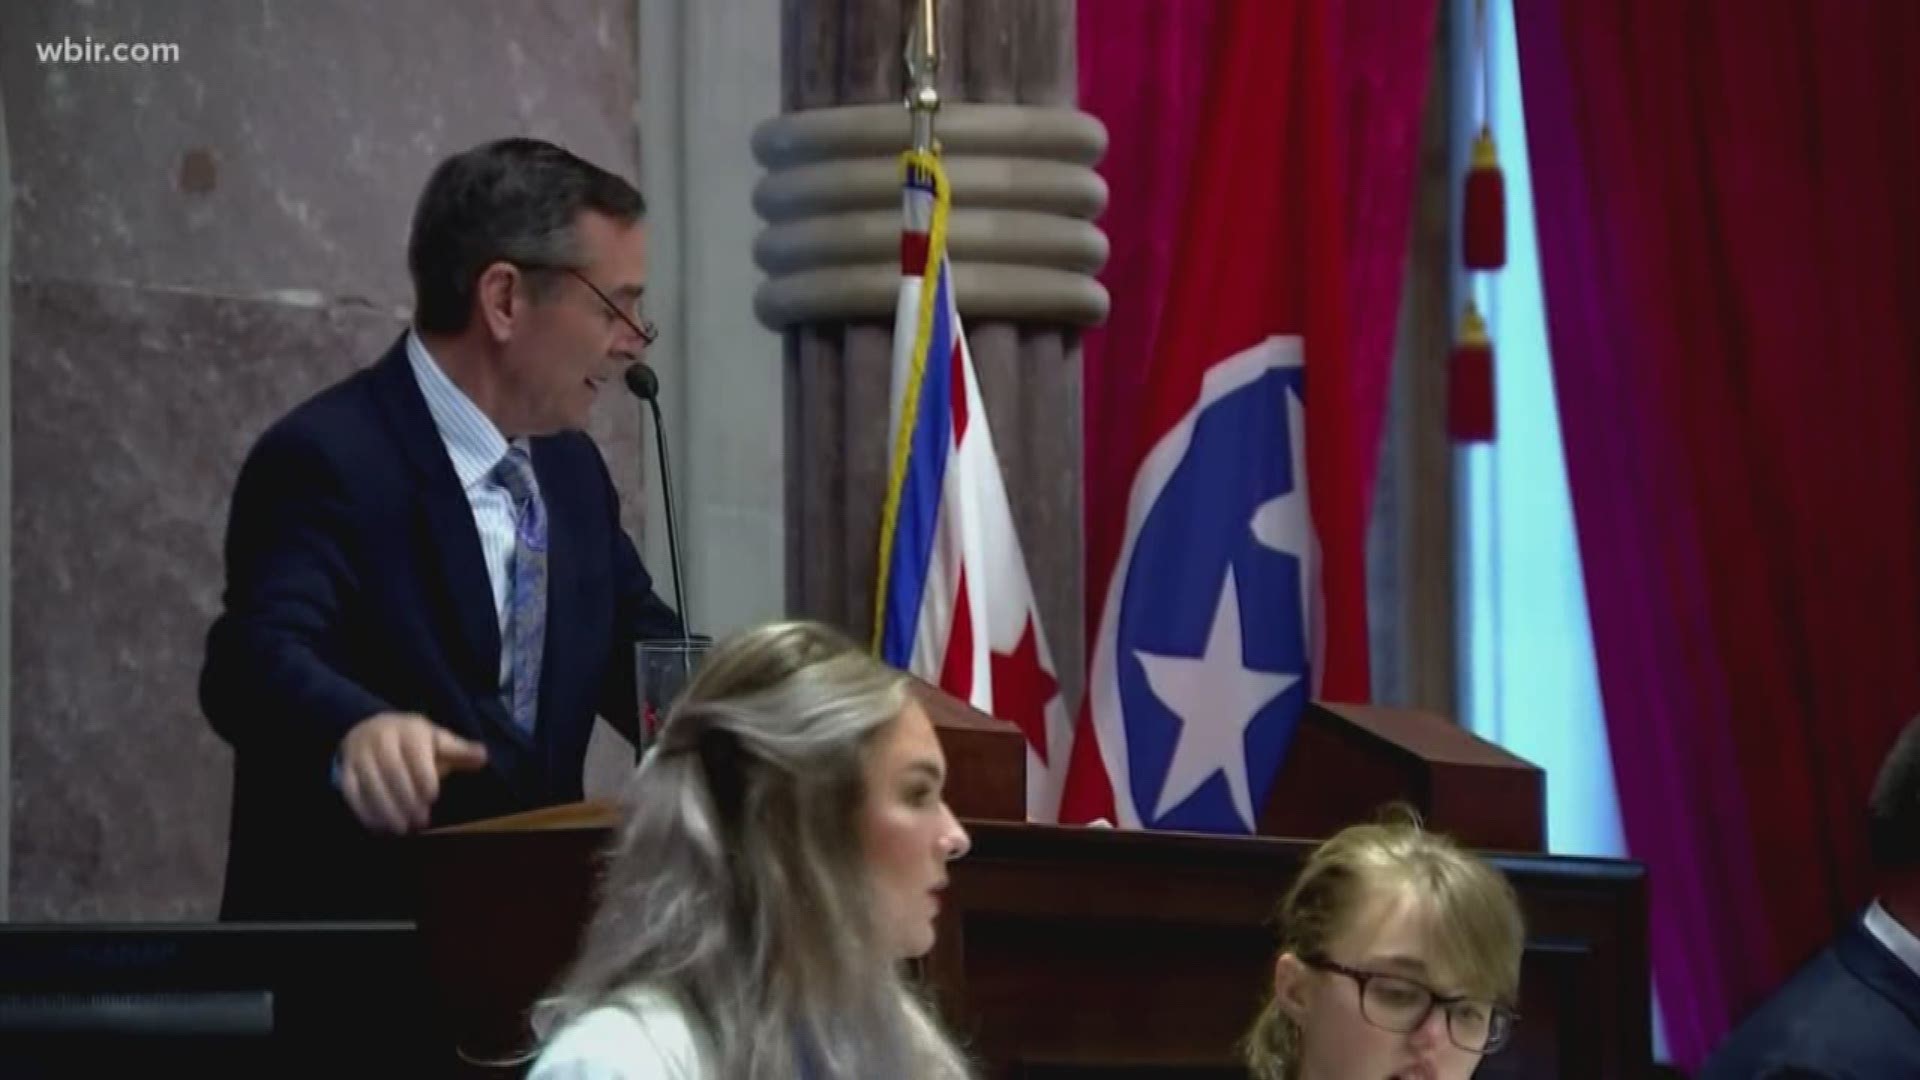 Governor Bill Lee says he is prepared to call a special session of the state legislature if House speaker Glen Casada fails to resign. This all centers scandals breaking this month in the office of the speaker including sexually-charged texts he exchanged with a former staffer.